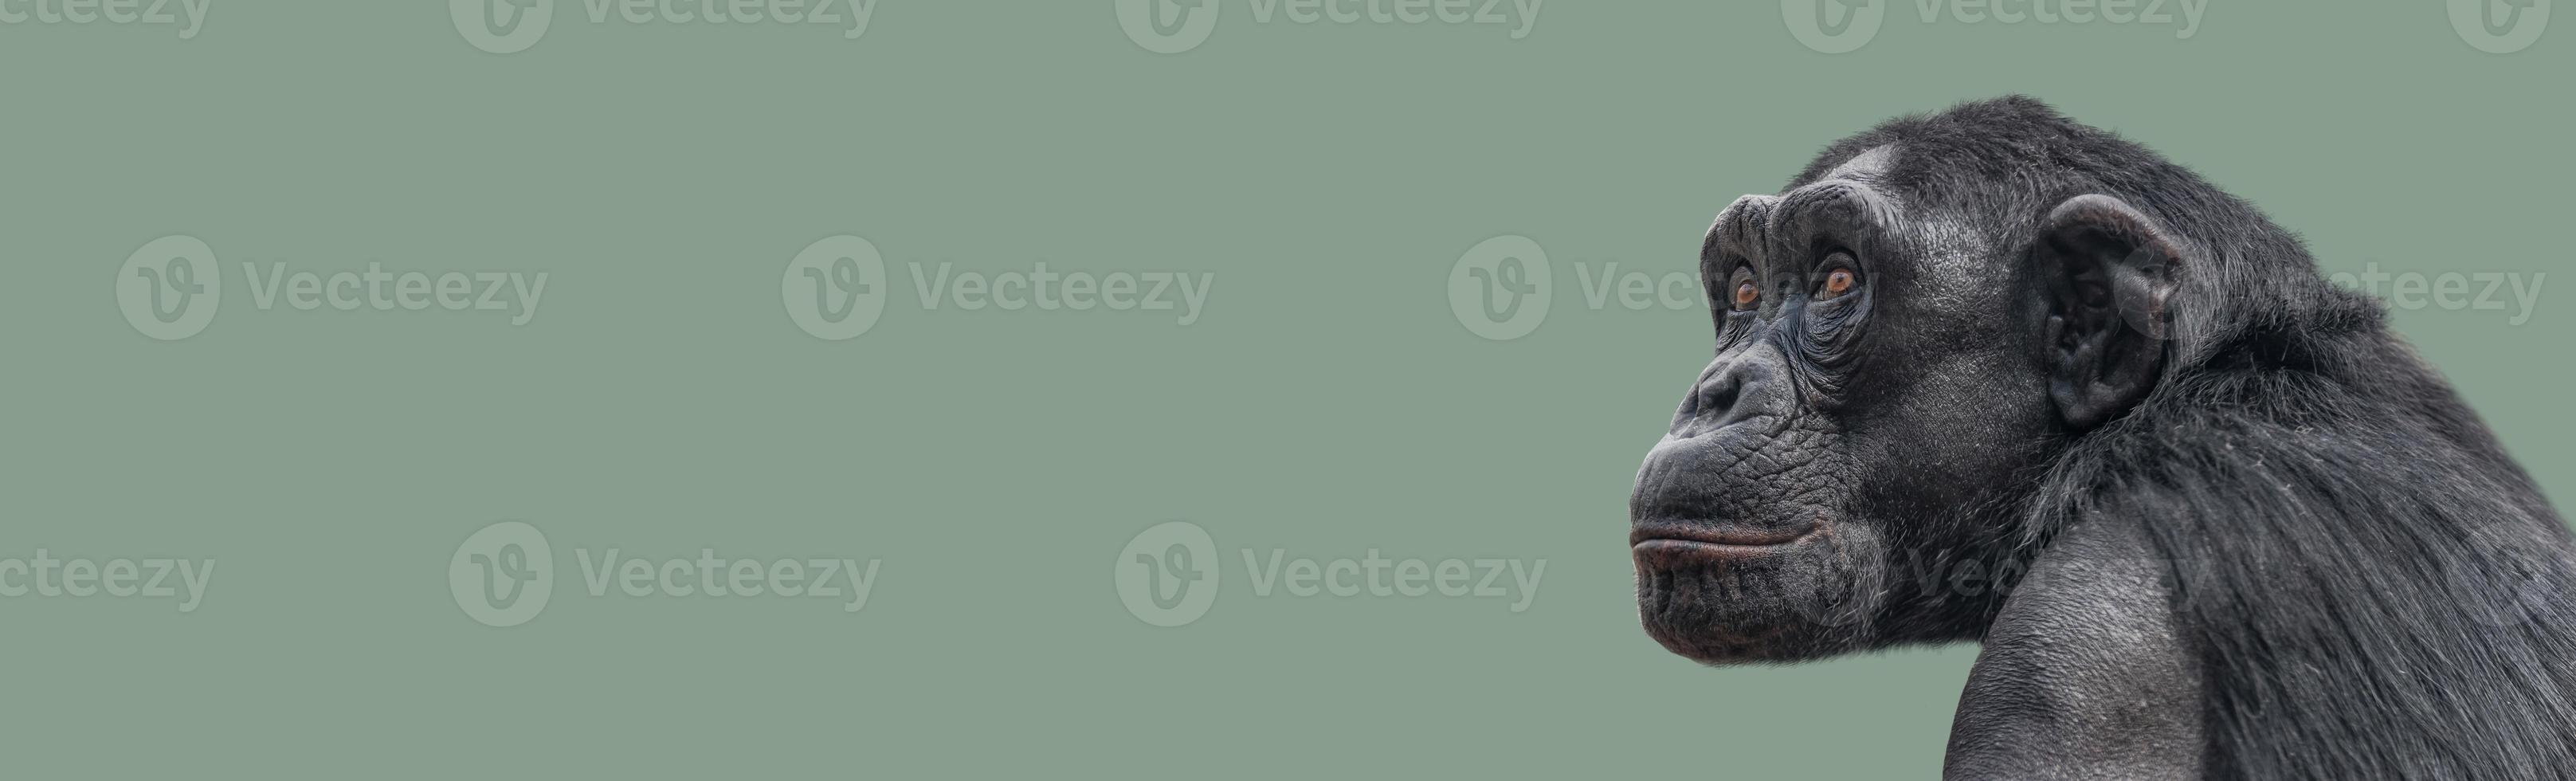 Banner with a portrait of smart looking chimpanzee closeup with copy space and solid background. Concept of wildlife conservation, biodiversity and animal intelligence. photo